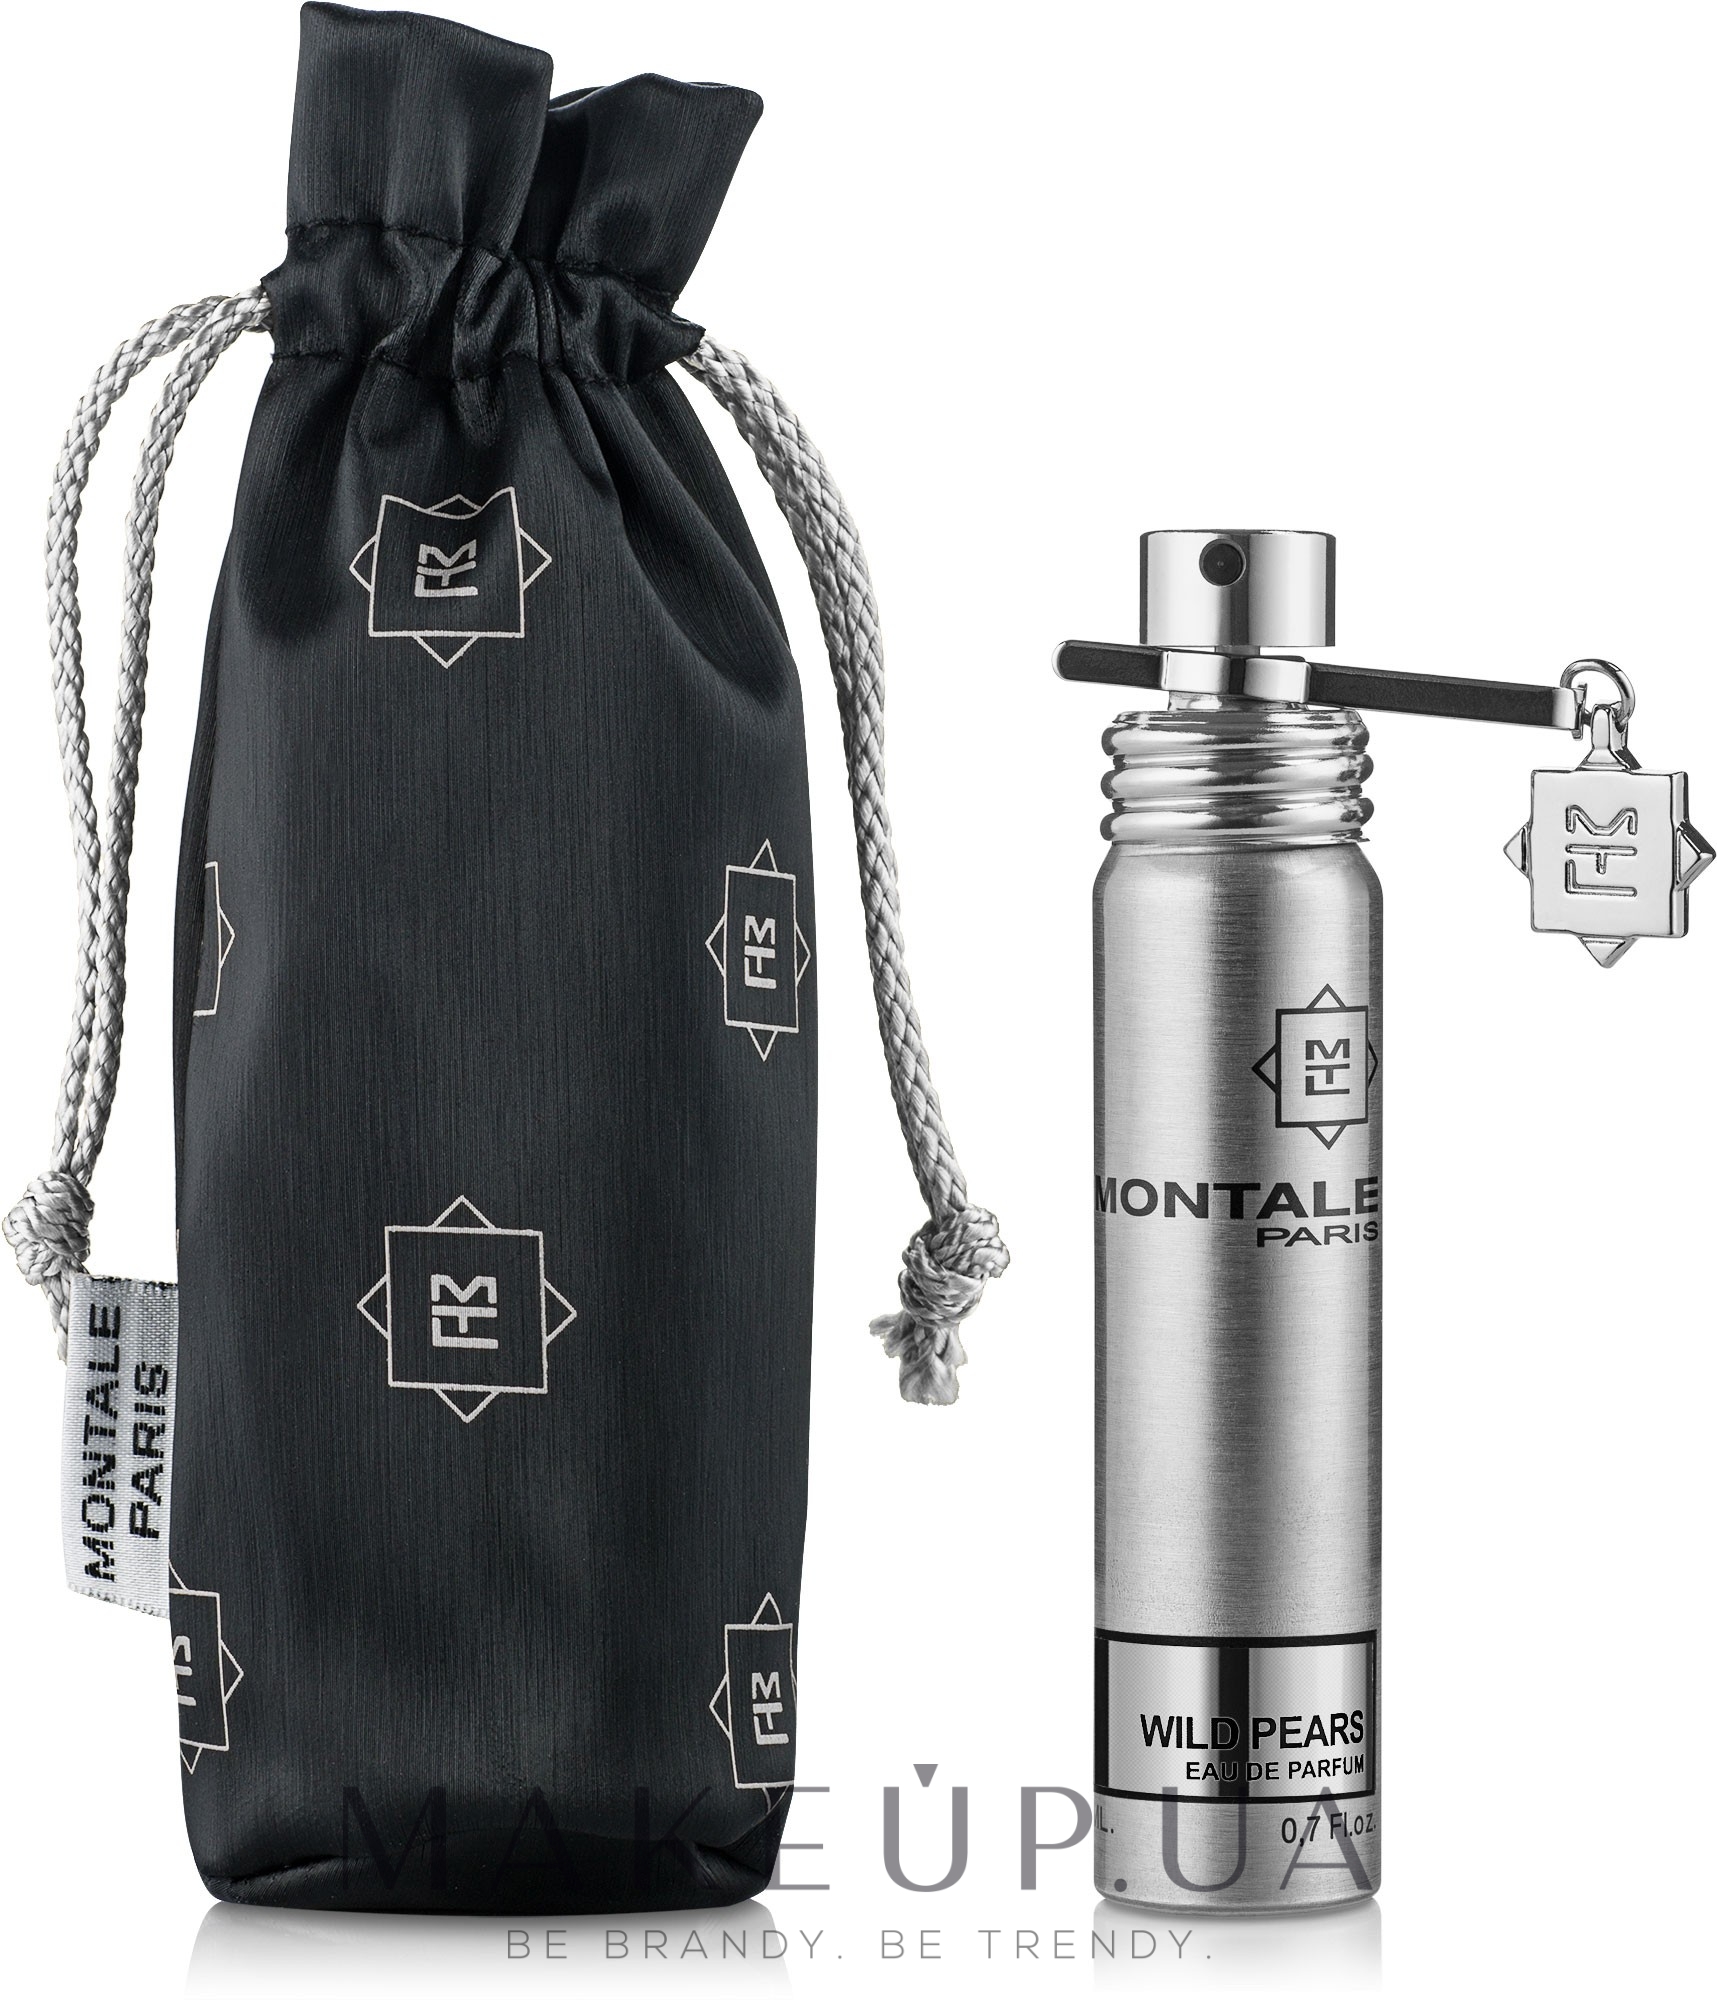 Montale Wild Pears Travel Edition